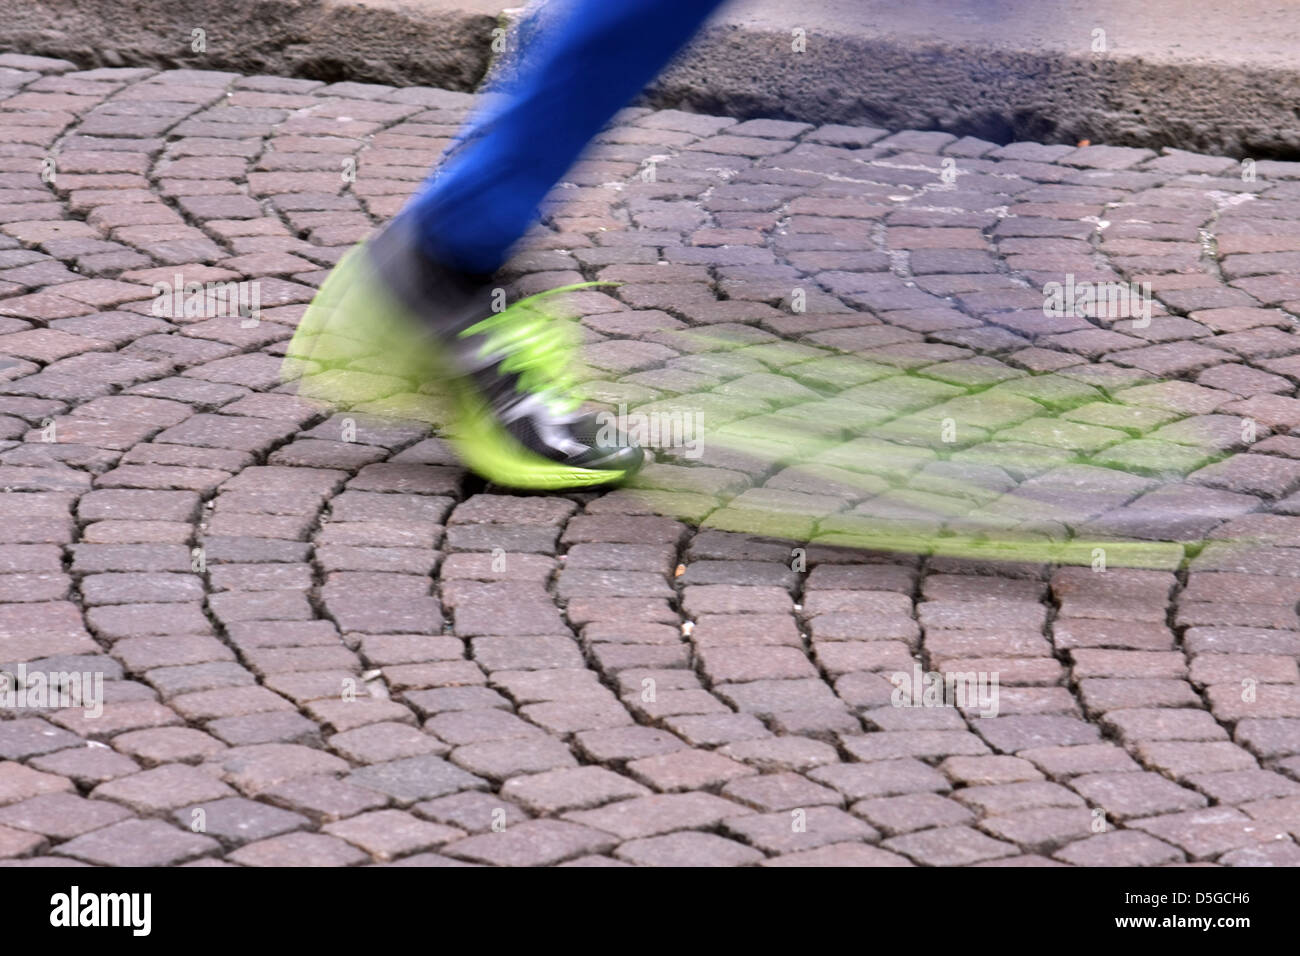 fast motion running shoe during the race in the city Stock Photo